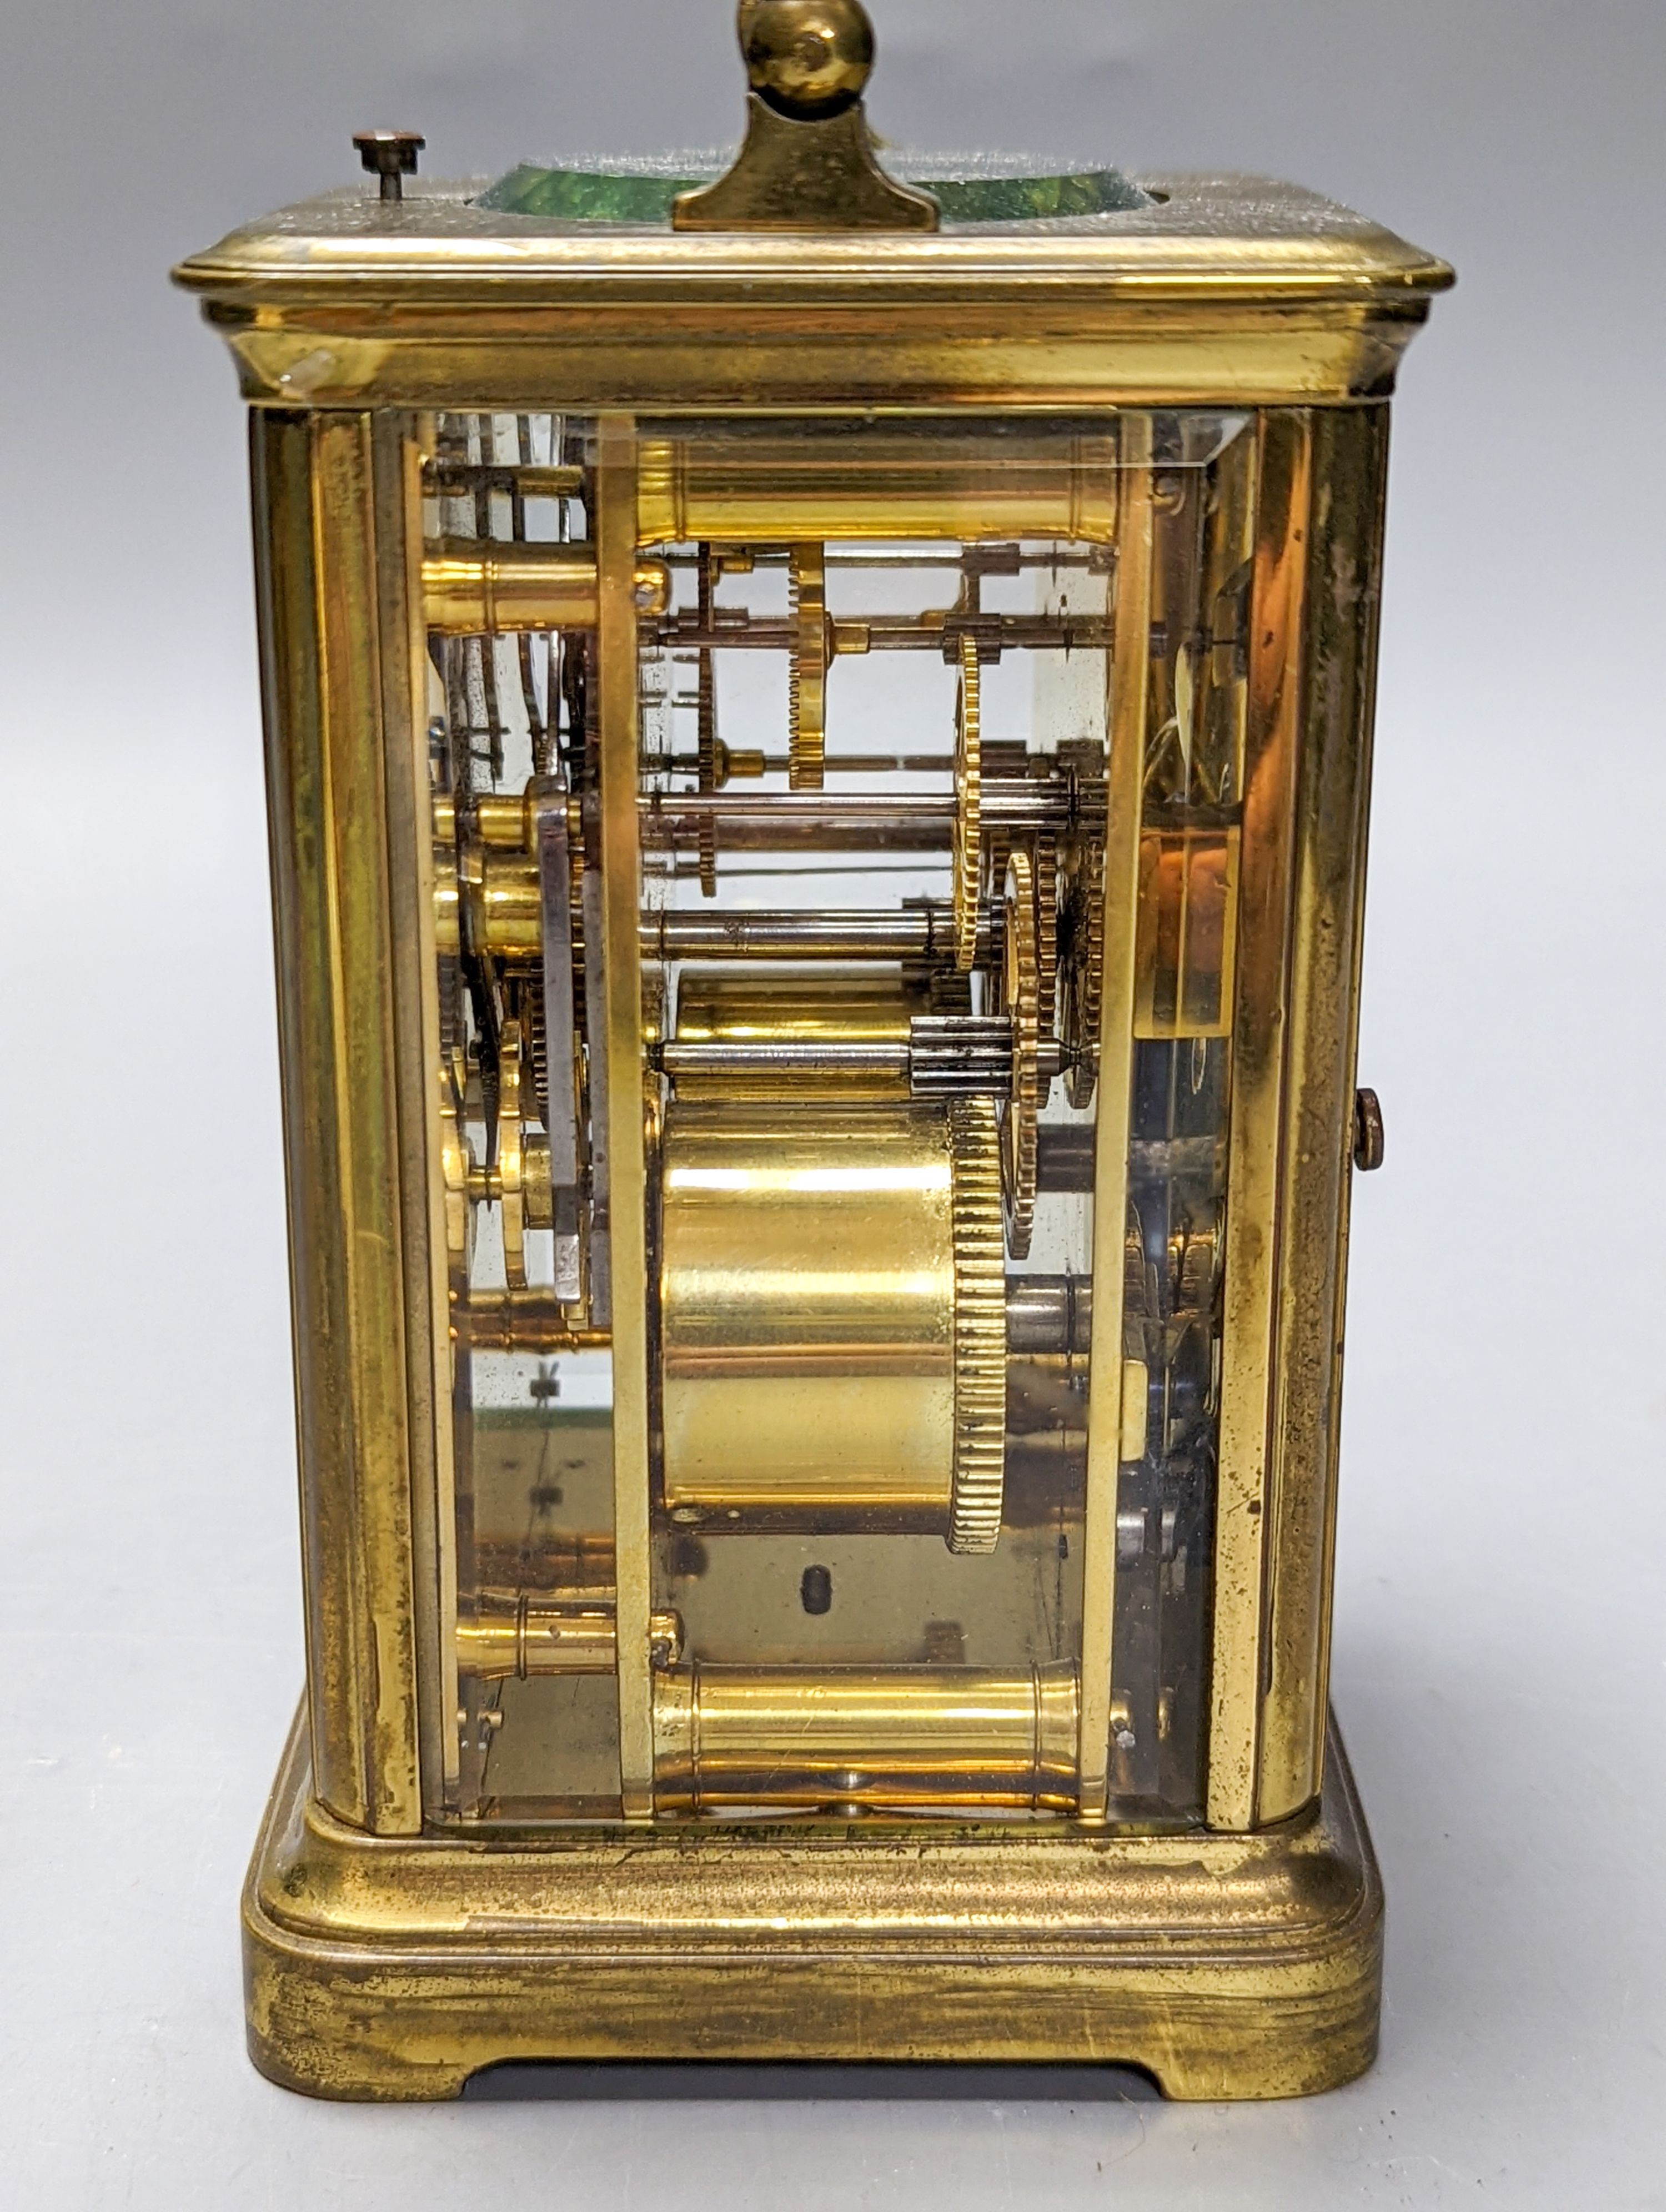 A French brass repeating carriage clock with key. 13.5cm